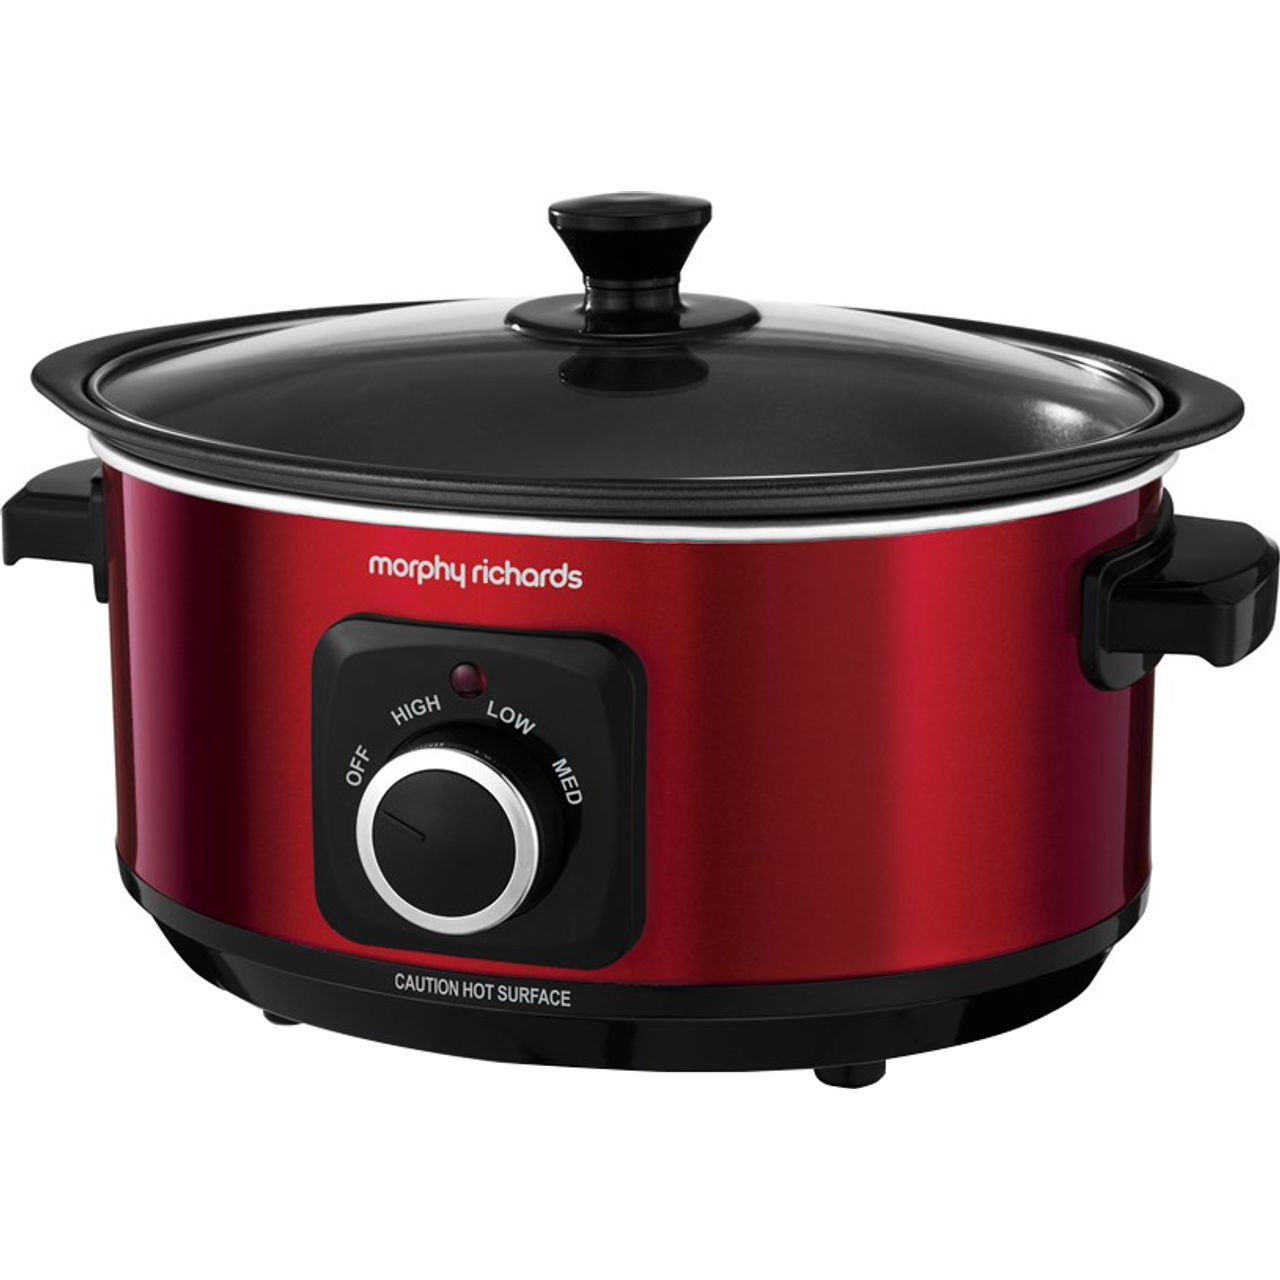 Morphy Richards Evoke Sear And Stew 460014 3.5 Litre Slow Cooker Review